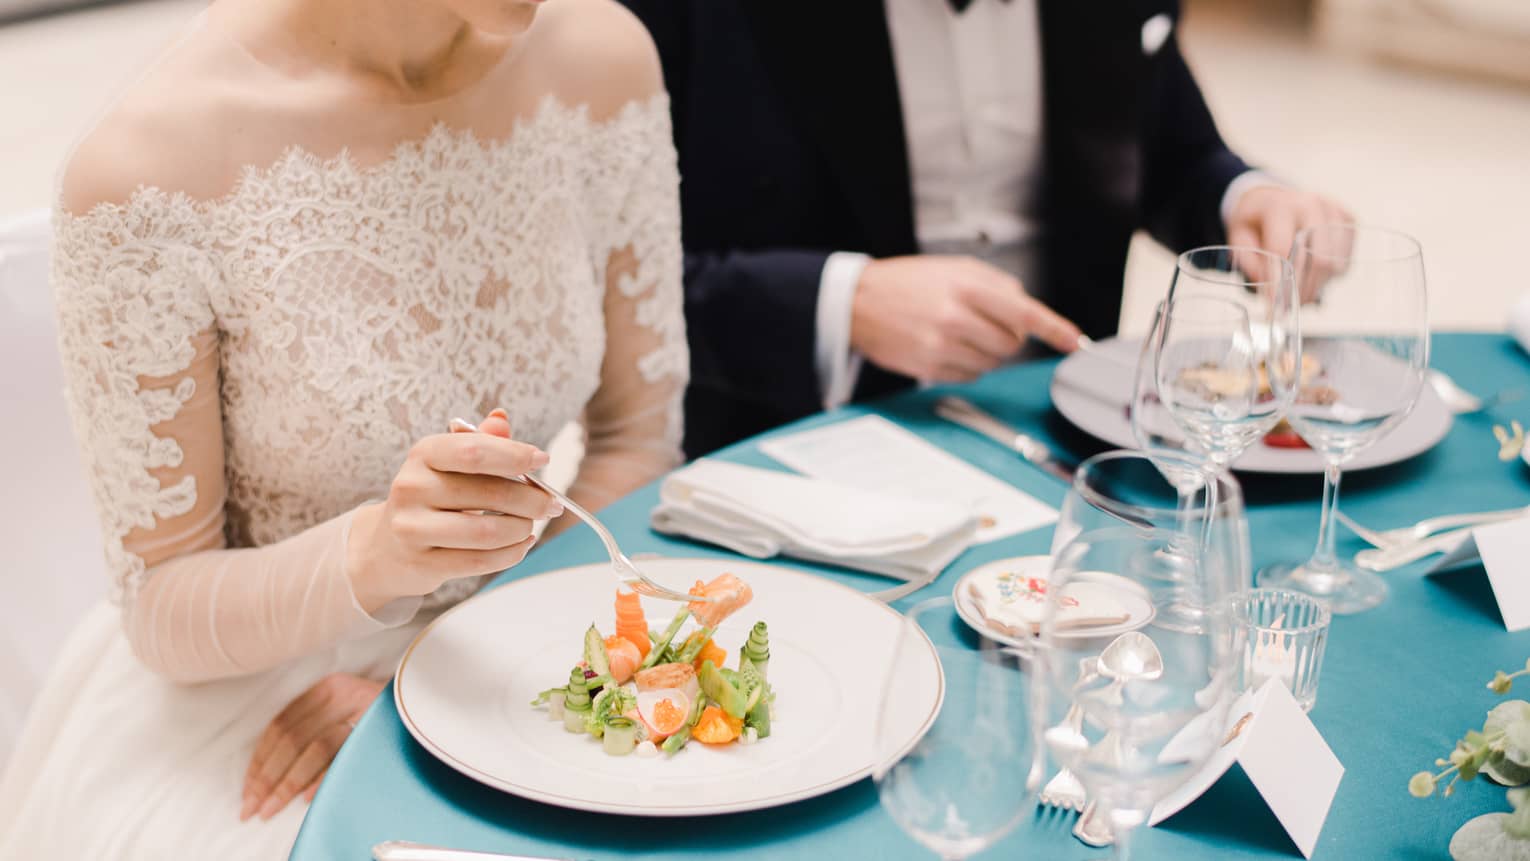 Bride and groom sitting at blue and white formally set table, eating salad